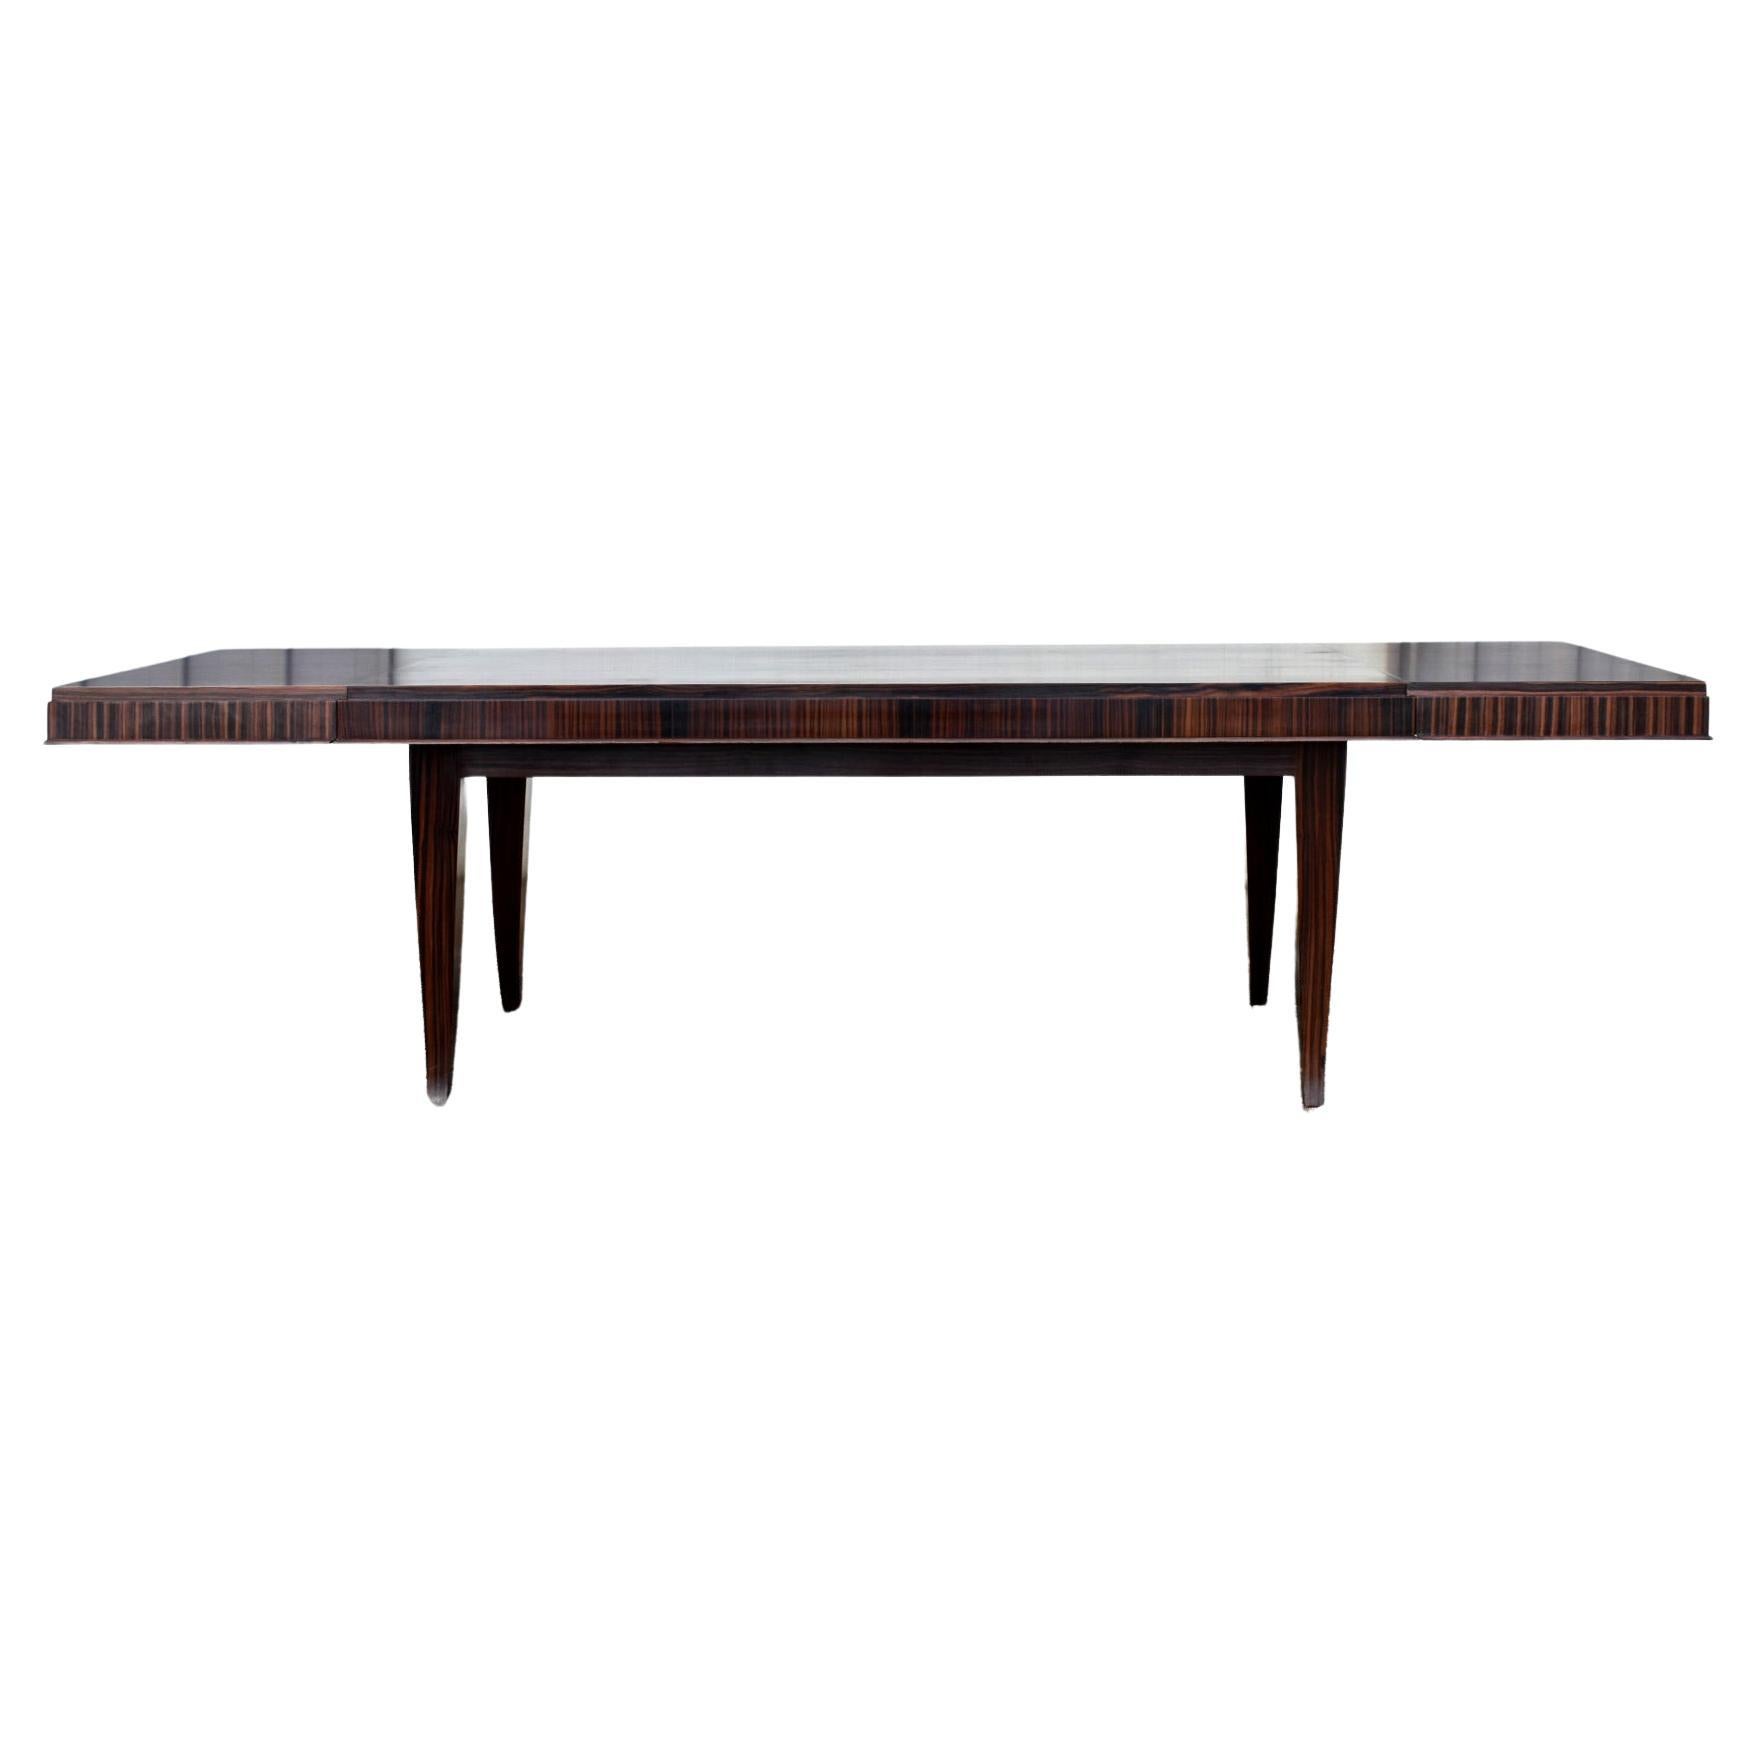 Impressive French Macassar Ebony Dining Table Art Deco Style For Sale